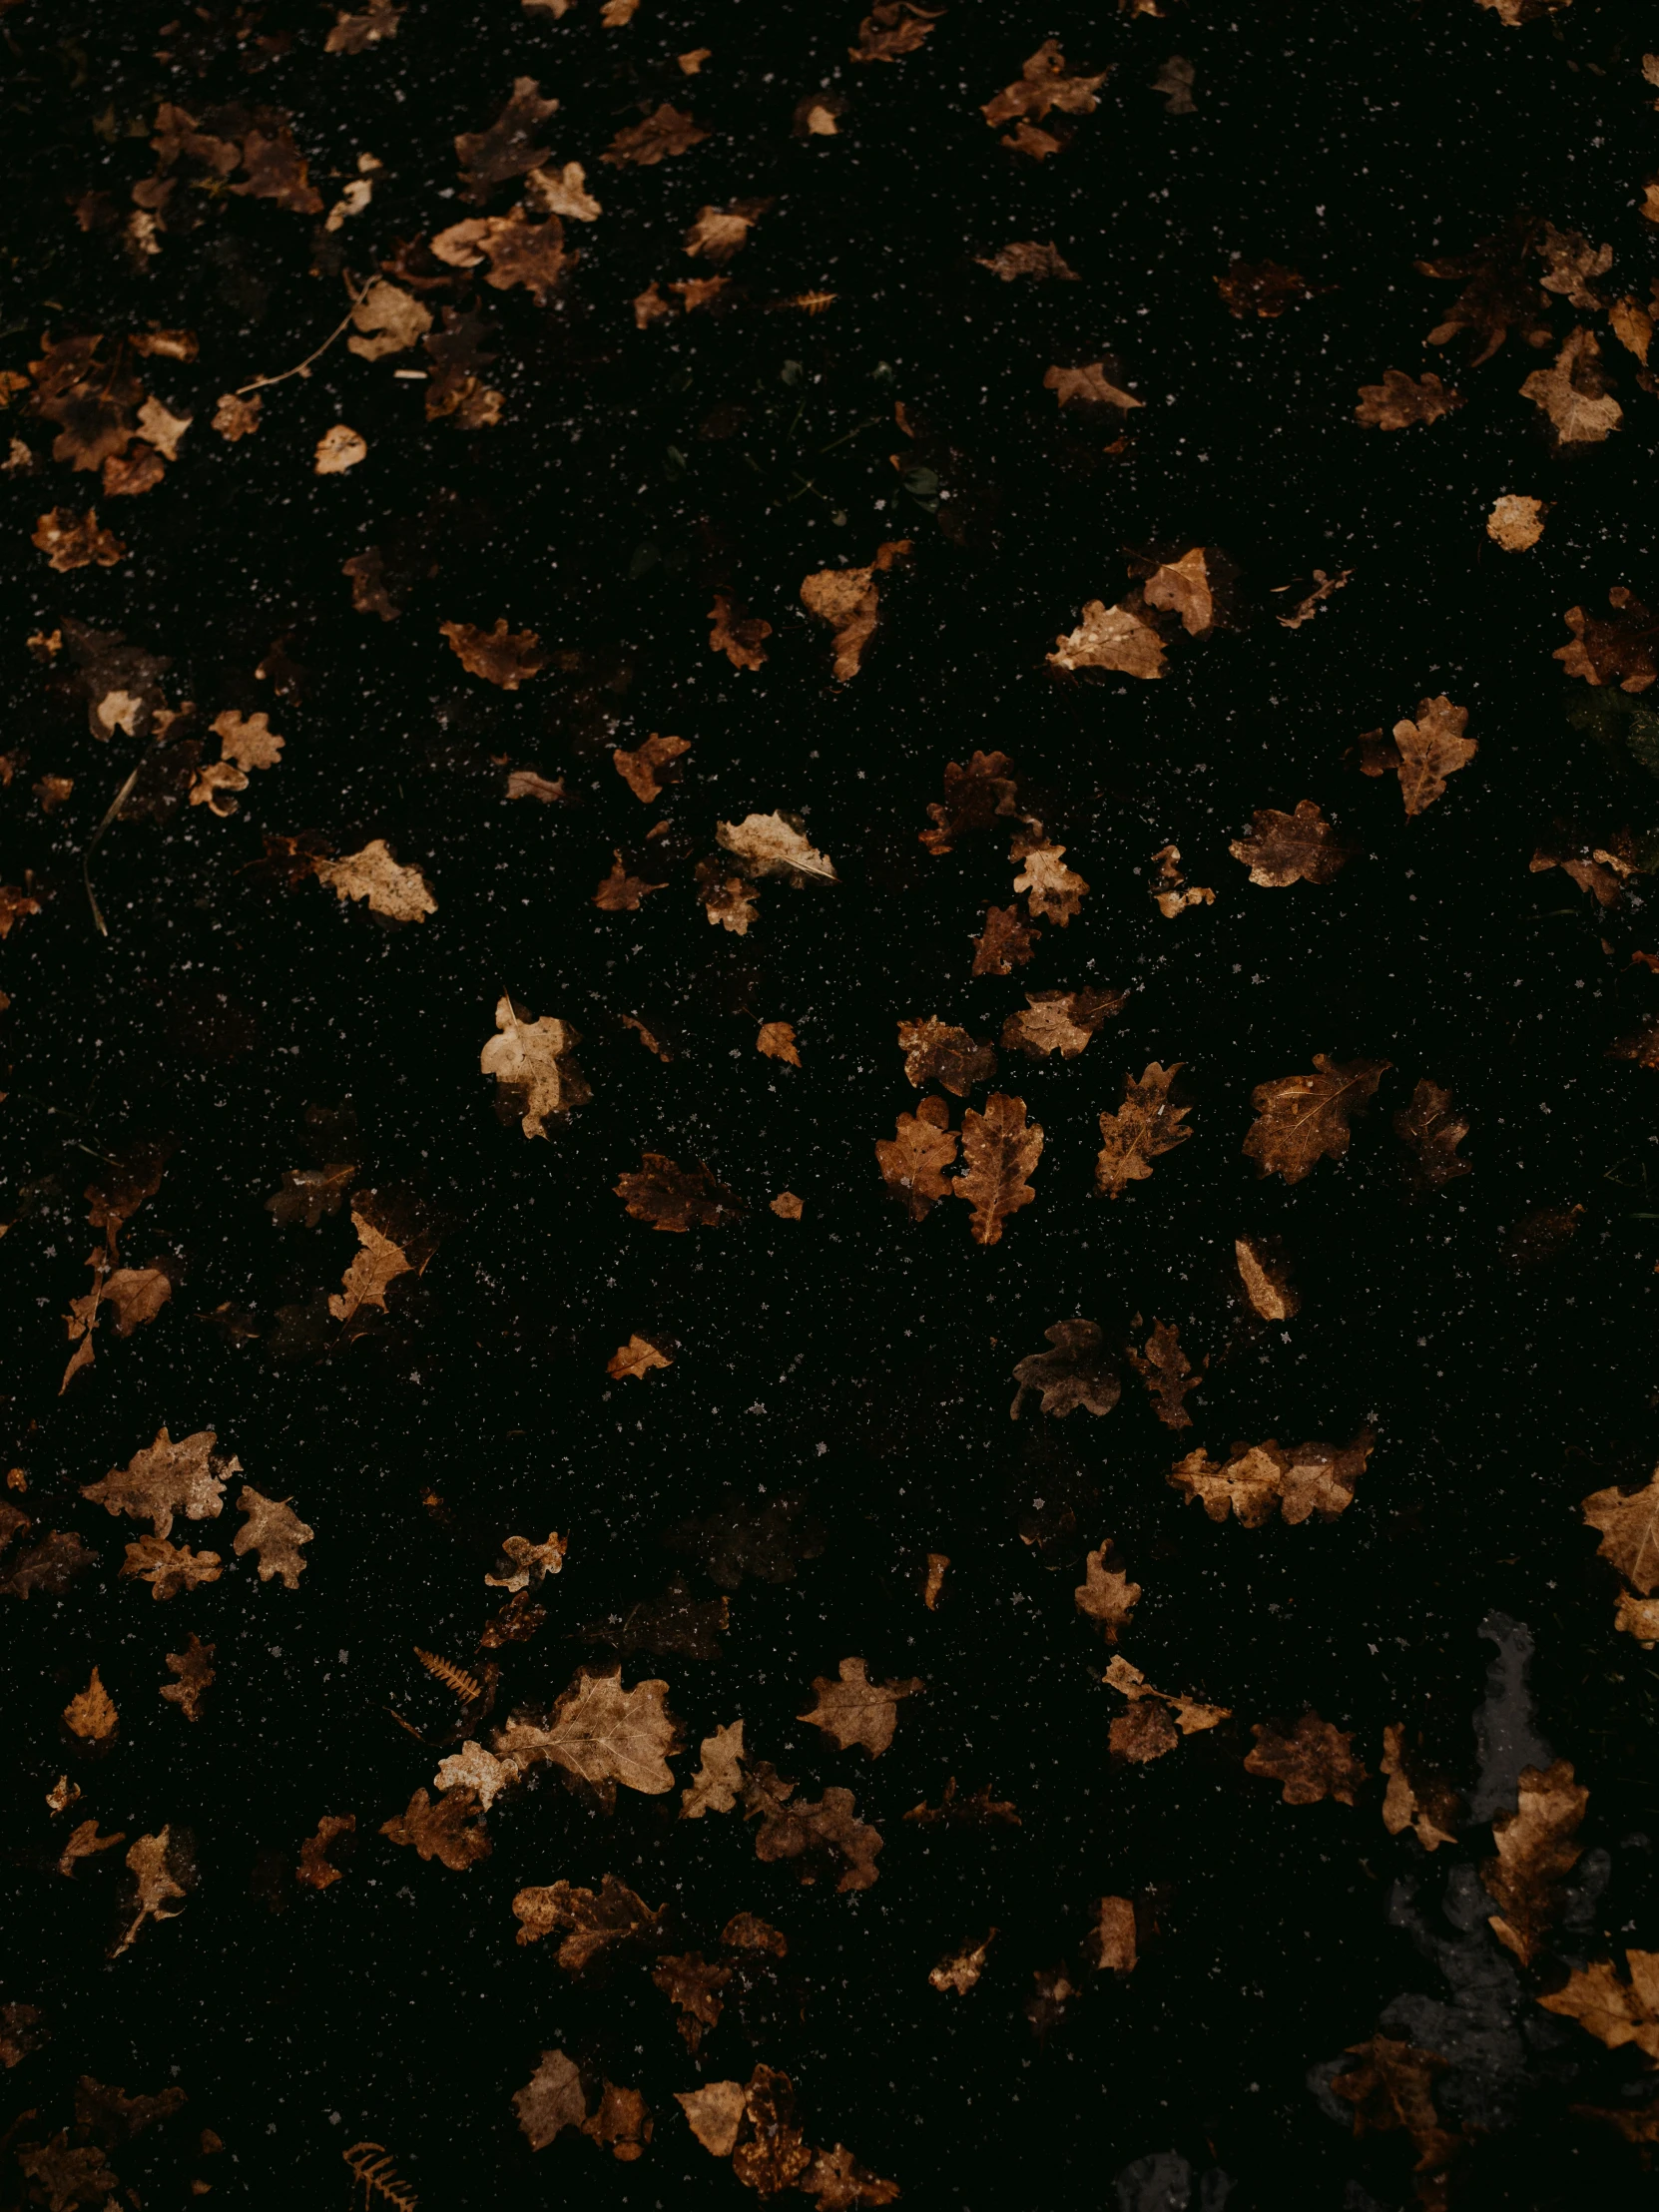 an upclose pograph of leaves scattered on the ground